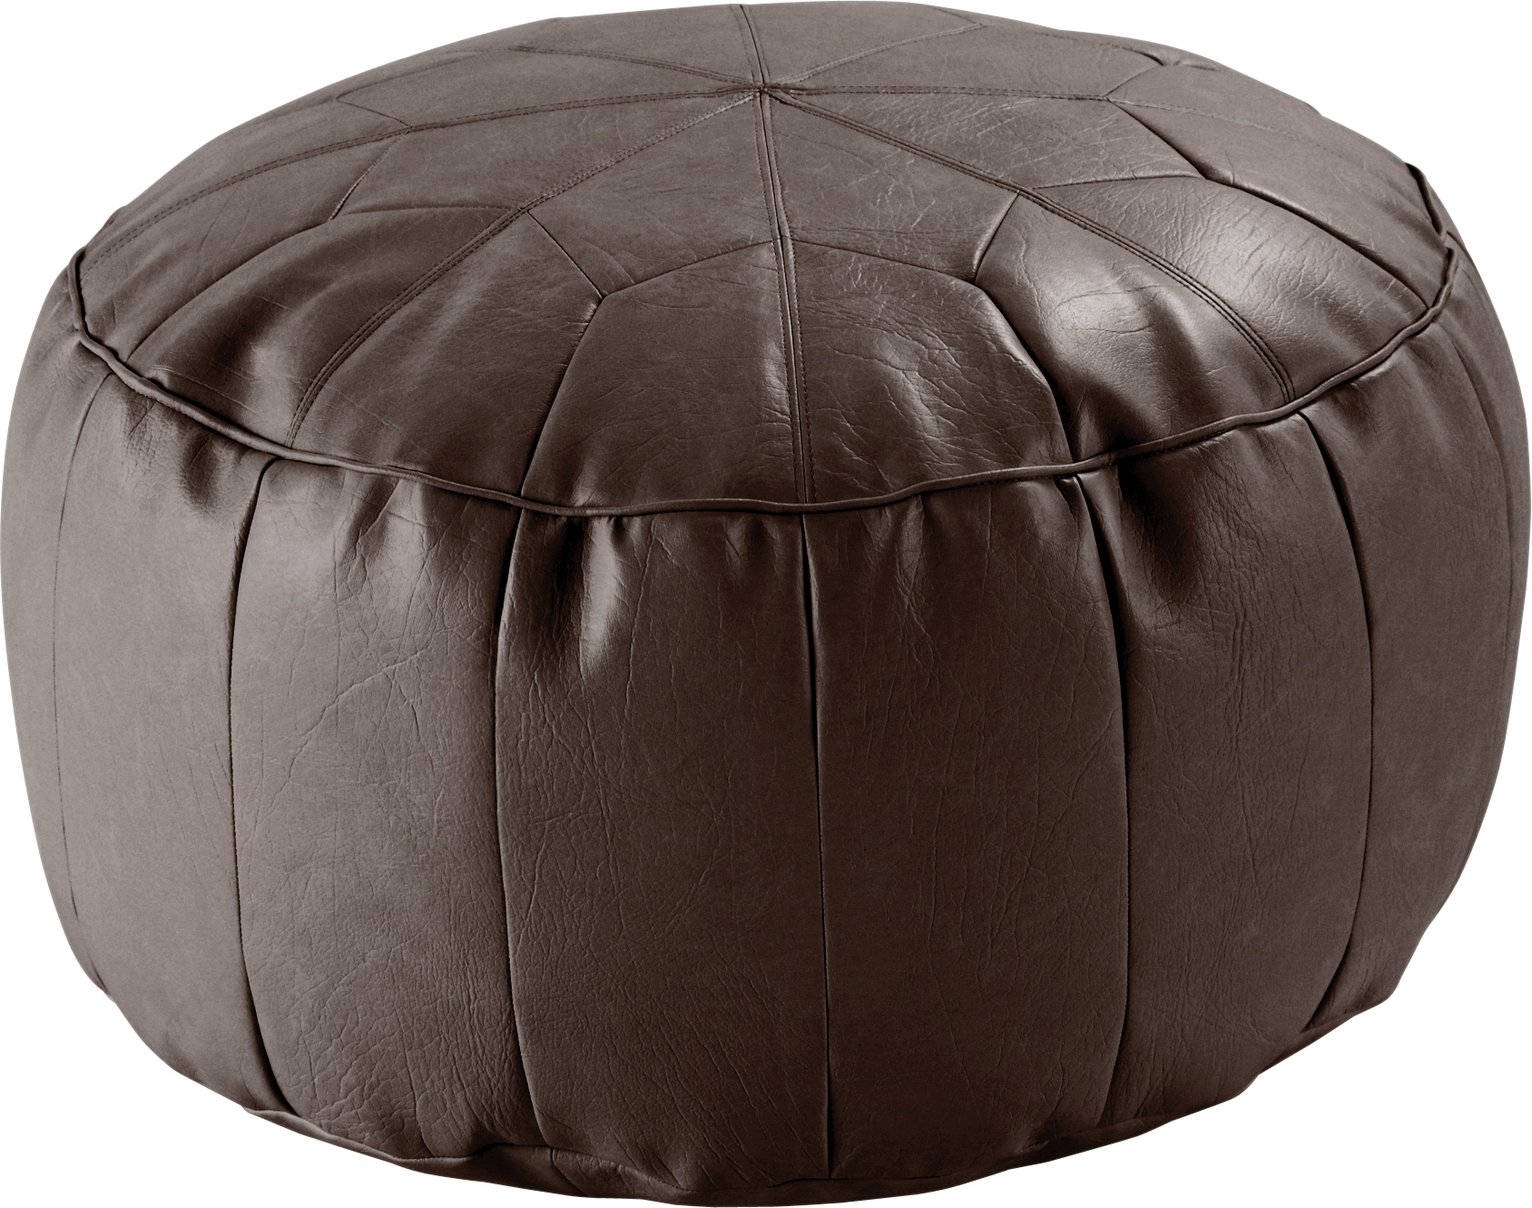 Argos Home Moroccan Faux Leather Footstool - Chocolate (2282424